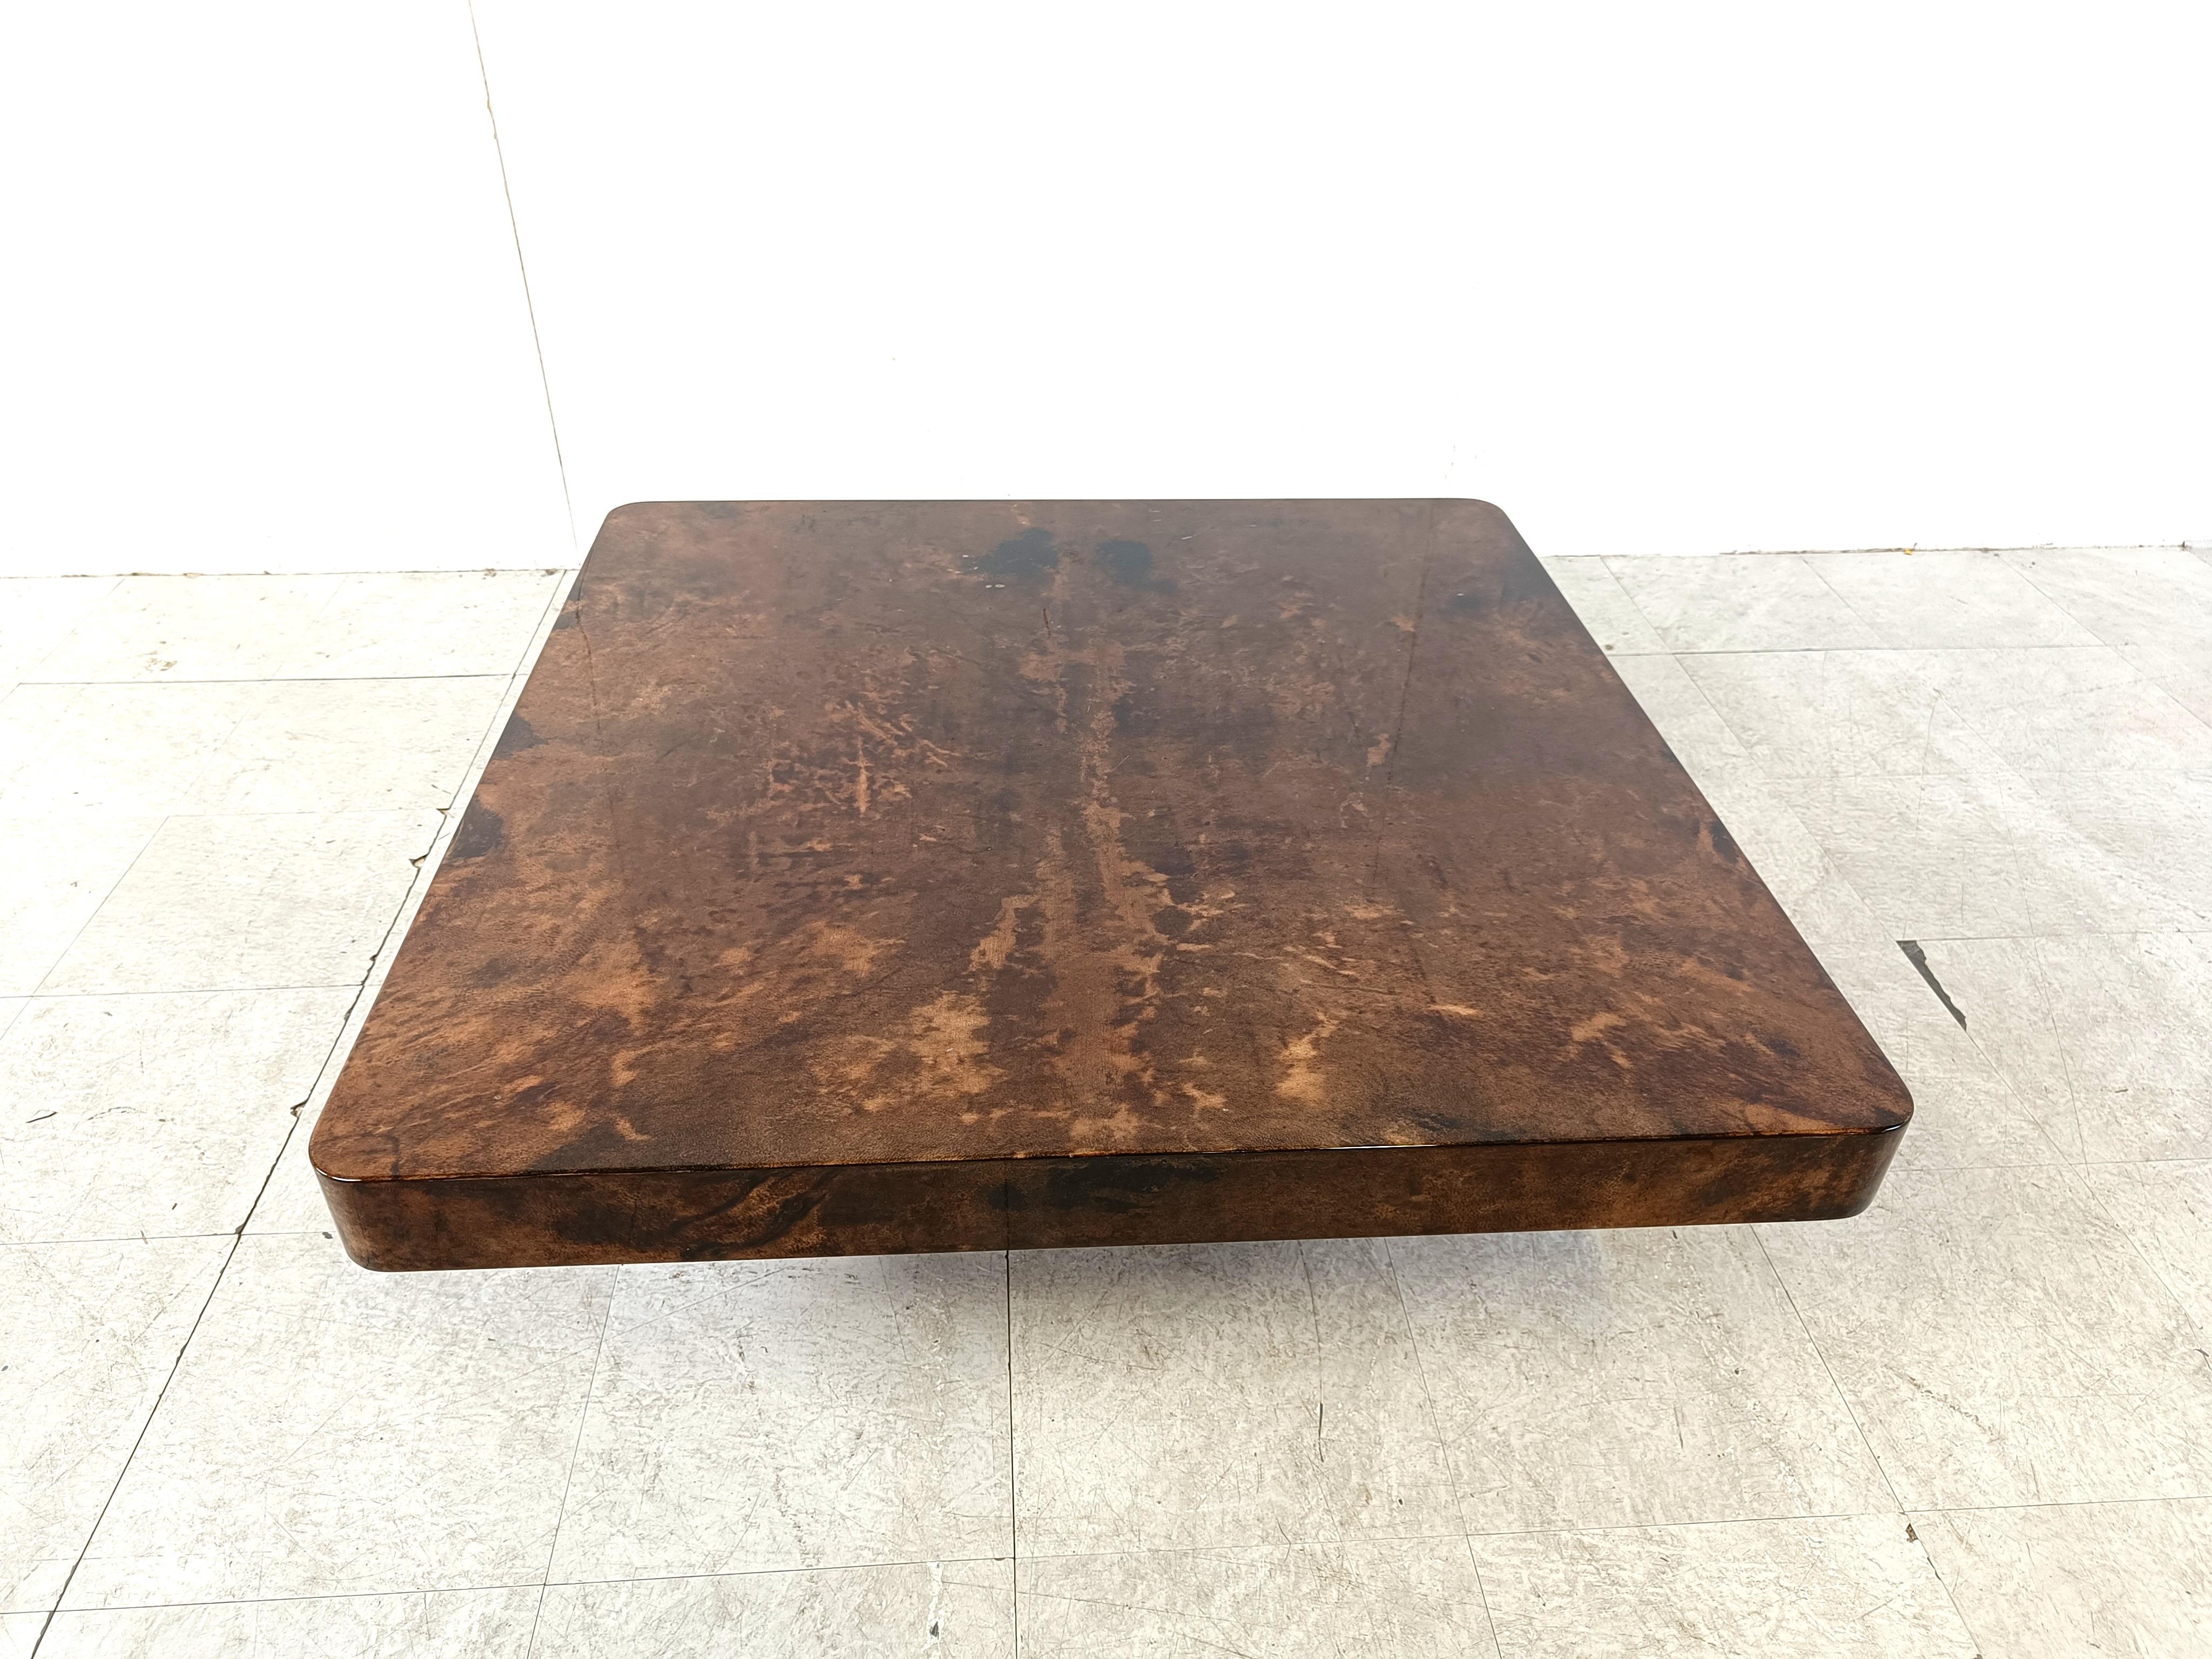 Mid century lacquered goatskin coffee table by Aldo tura.

Comes with a brown lacquered wooden base.

1960s - Italy

Dimensions:
Height: 37cm
Width depth: 90cm

Ref.: 715983